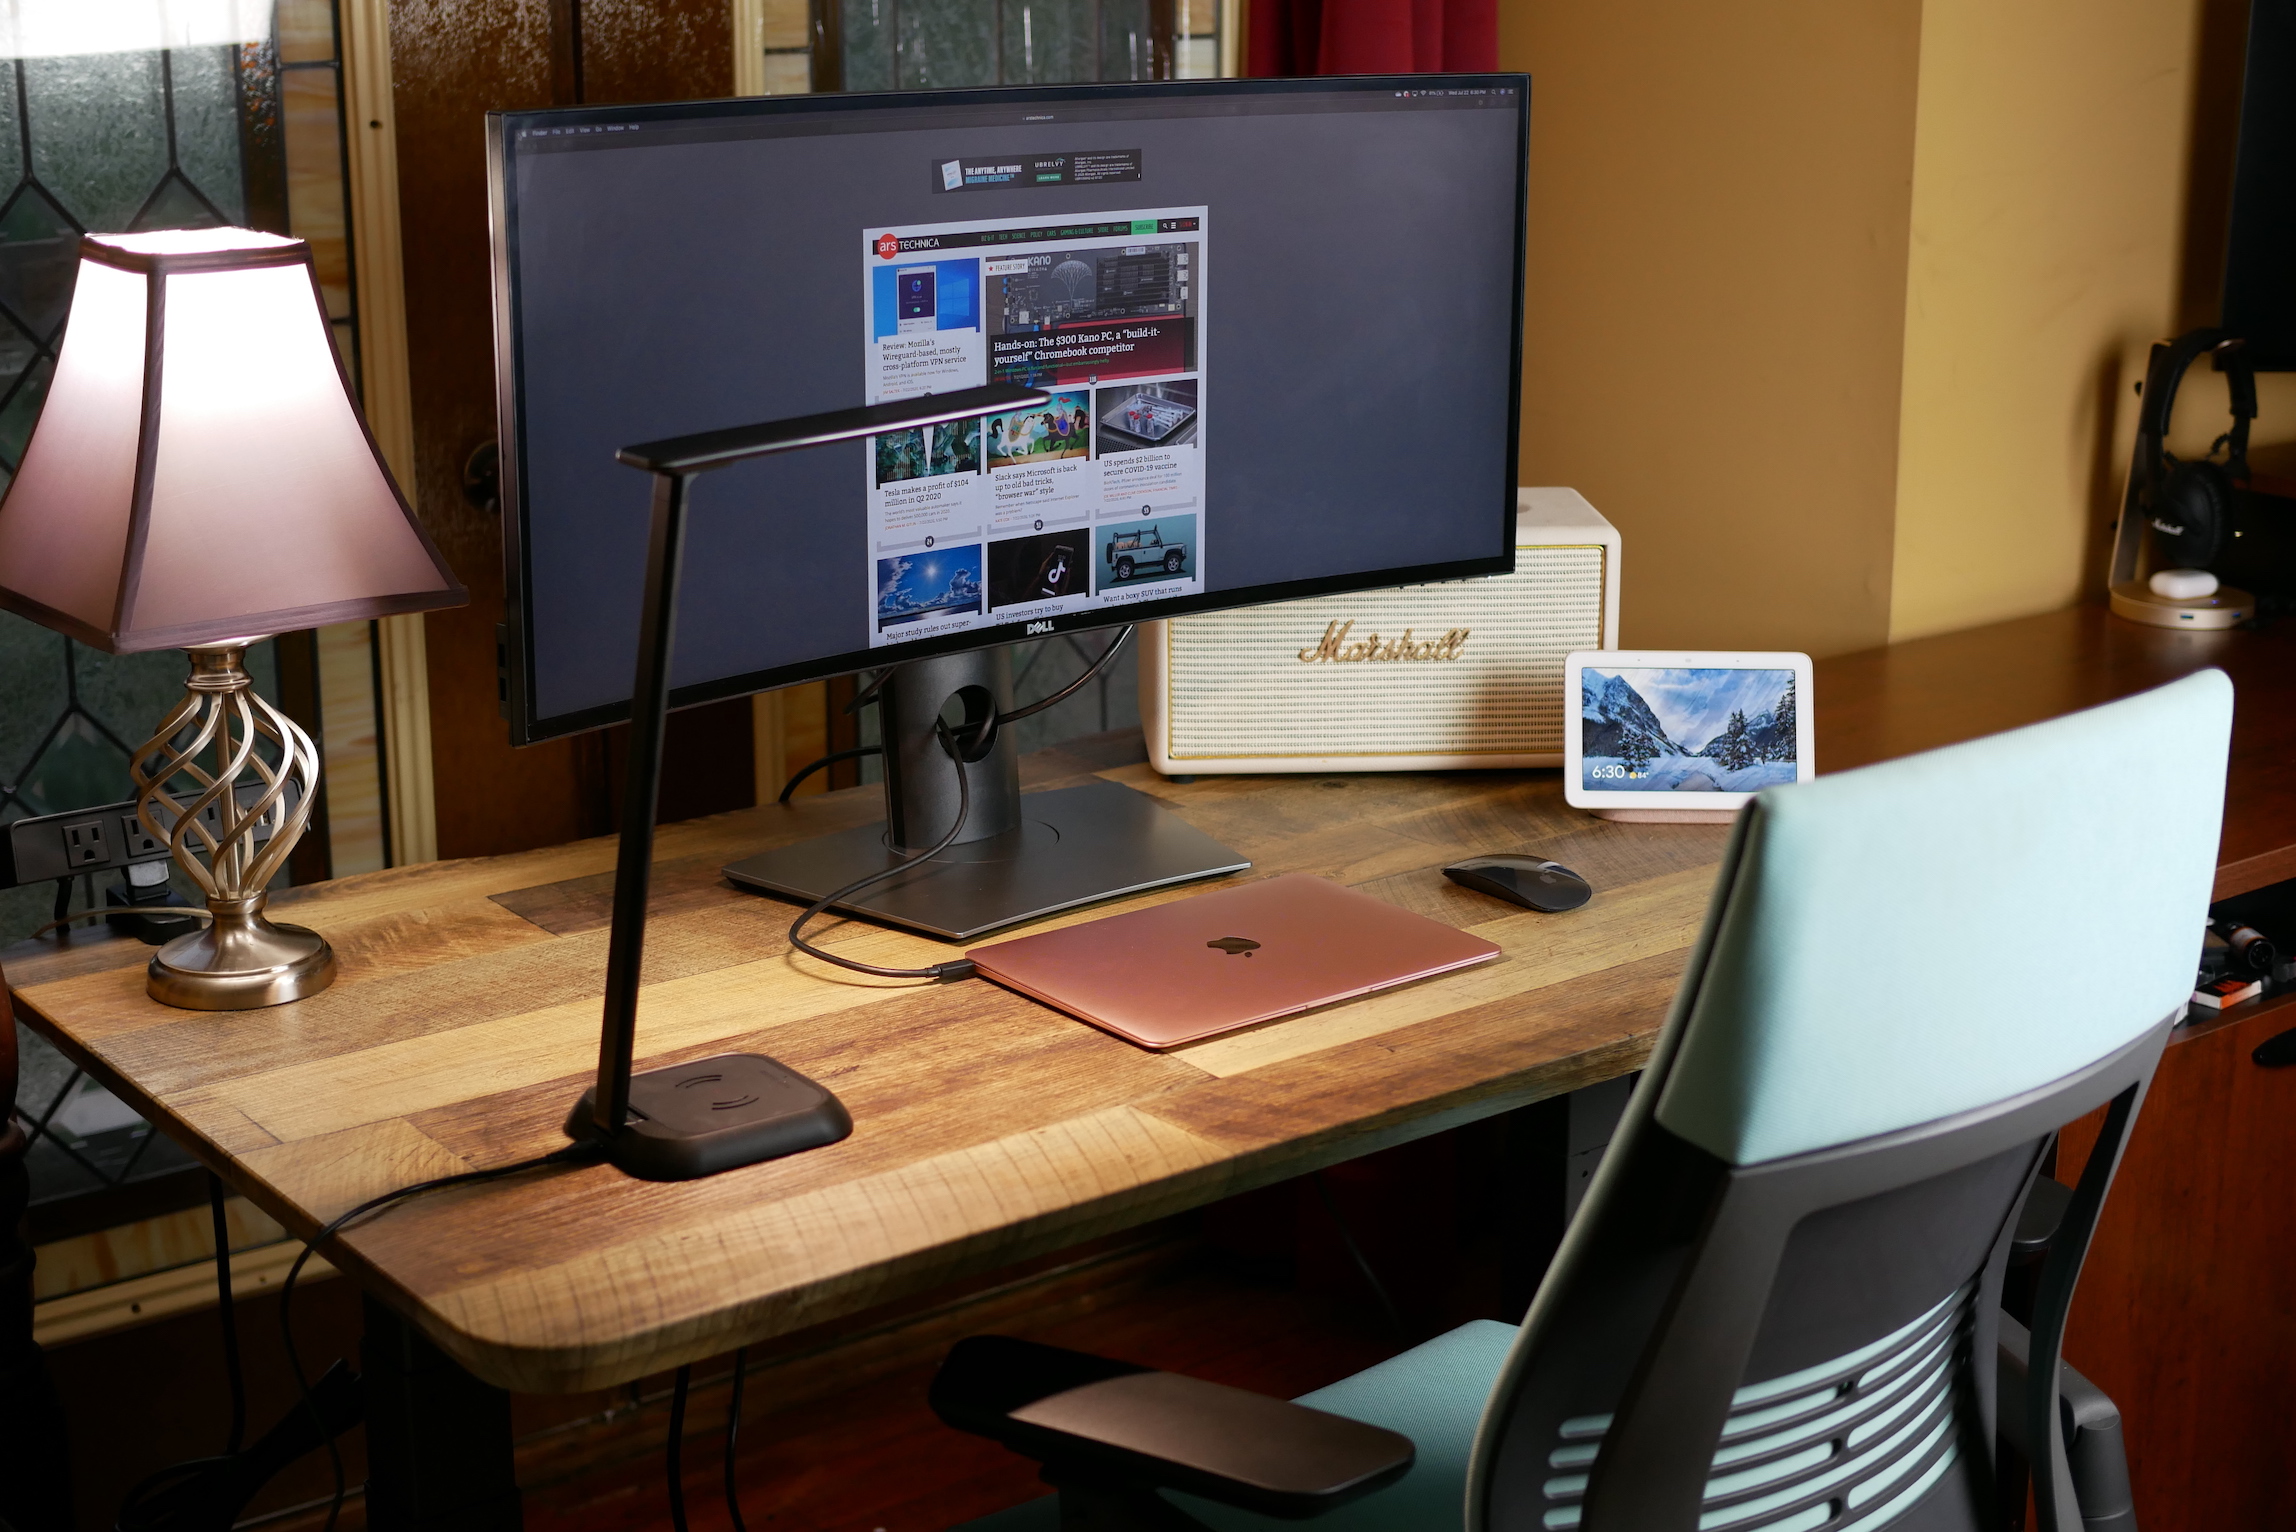 61 Best Cyber Monday 2020 deals for working from home | Ars Technica